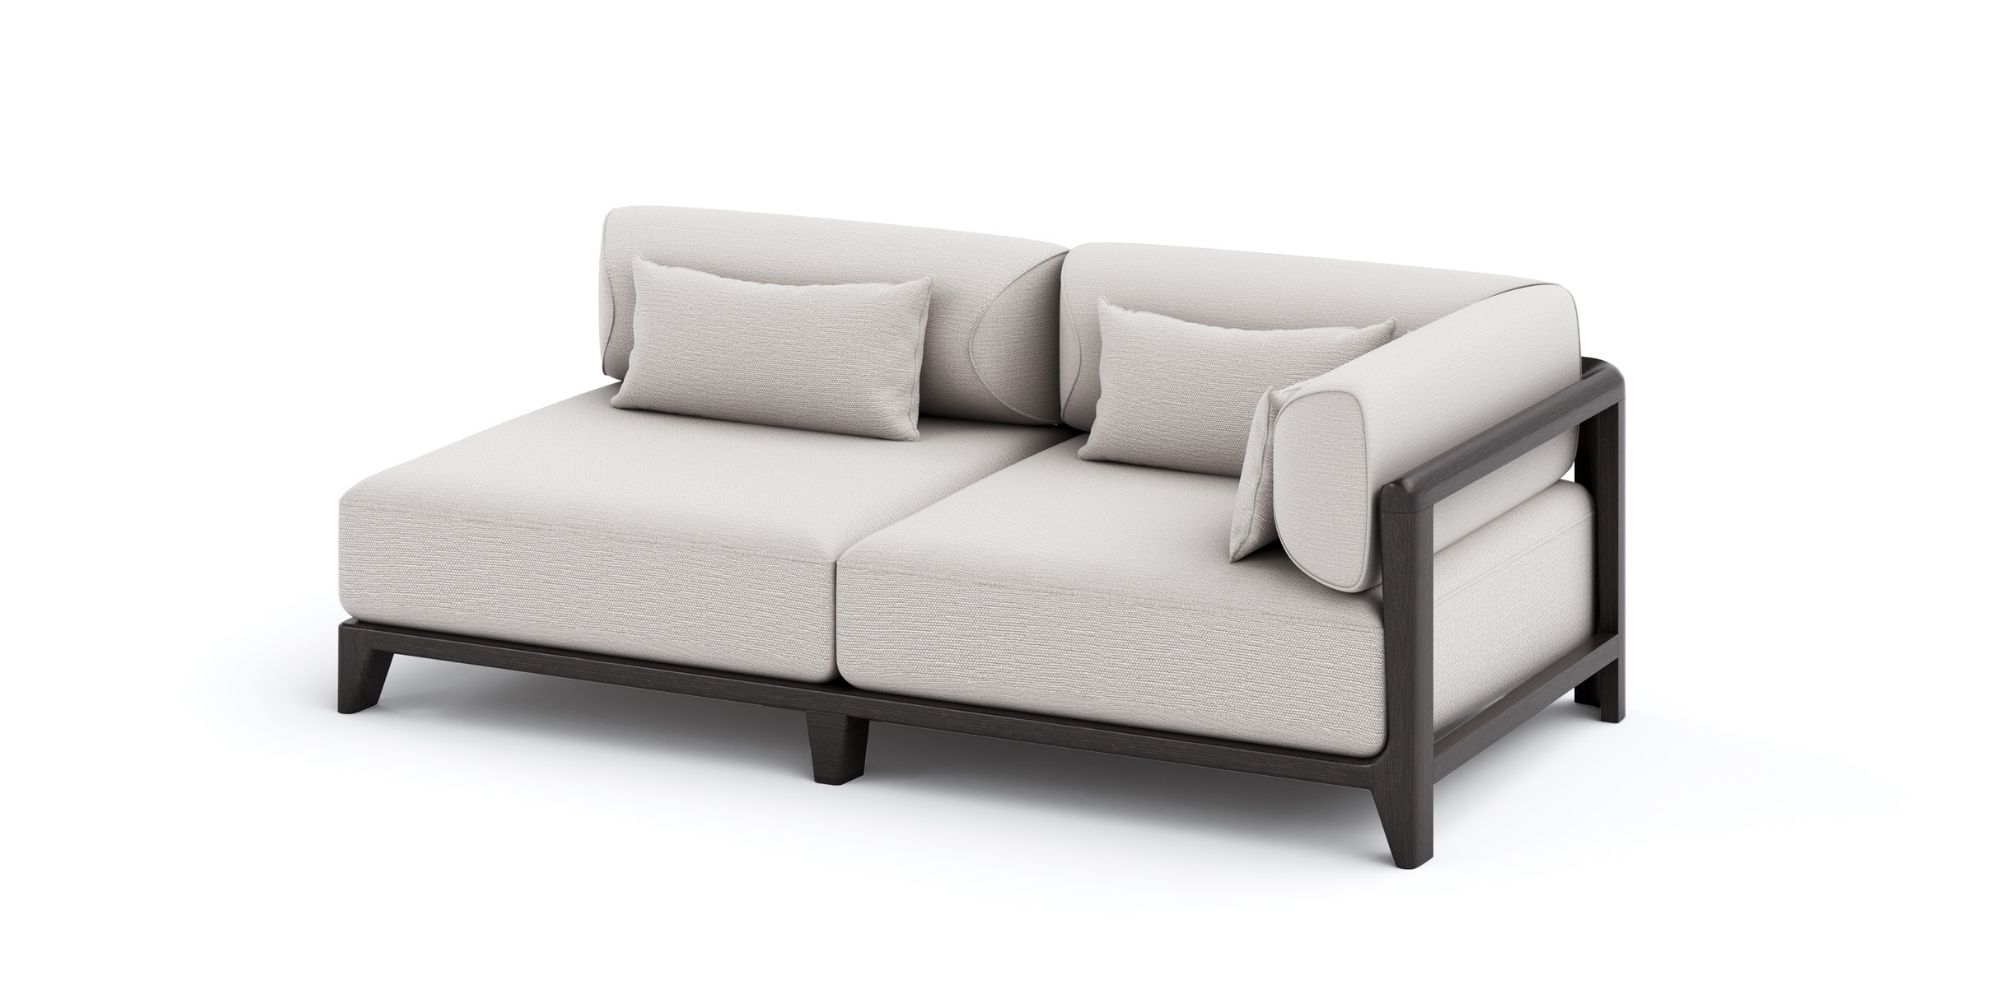 Tamarindo Day Bed in Outdoor Sofas Outdoor Loungers for Tamarindo collection